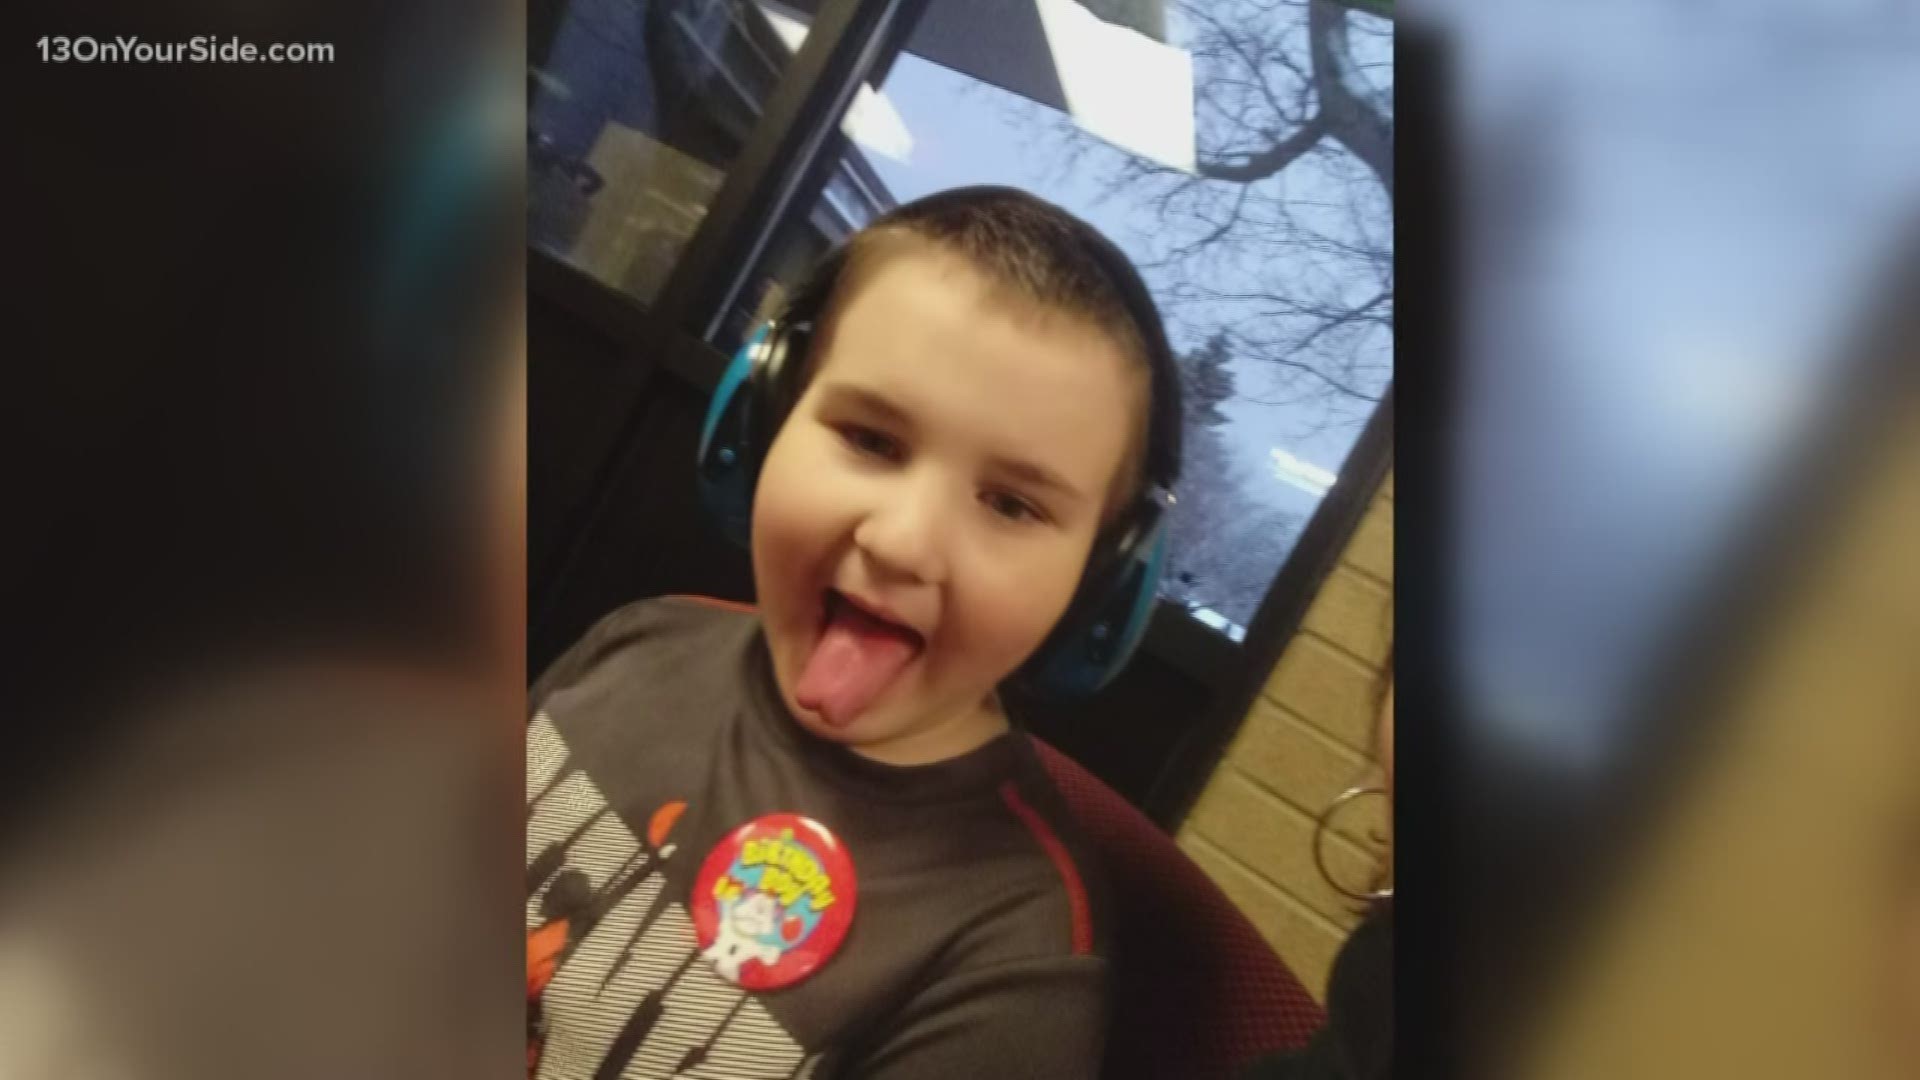 Each birthday marked another year Jaydon fought for his life. This is the story of Jaydon and his special 8th birthday.